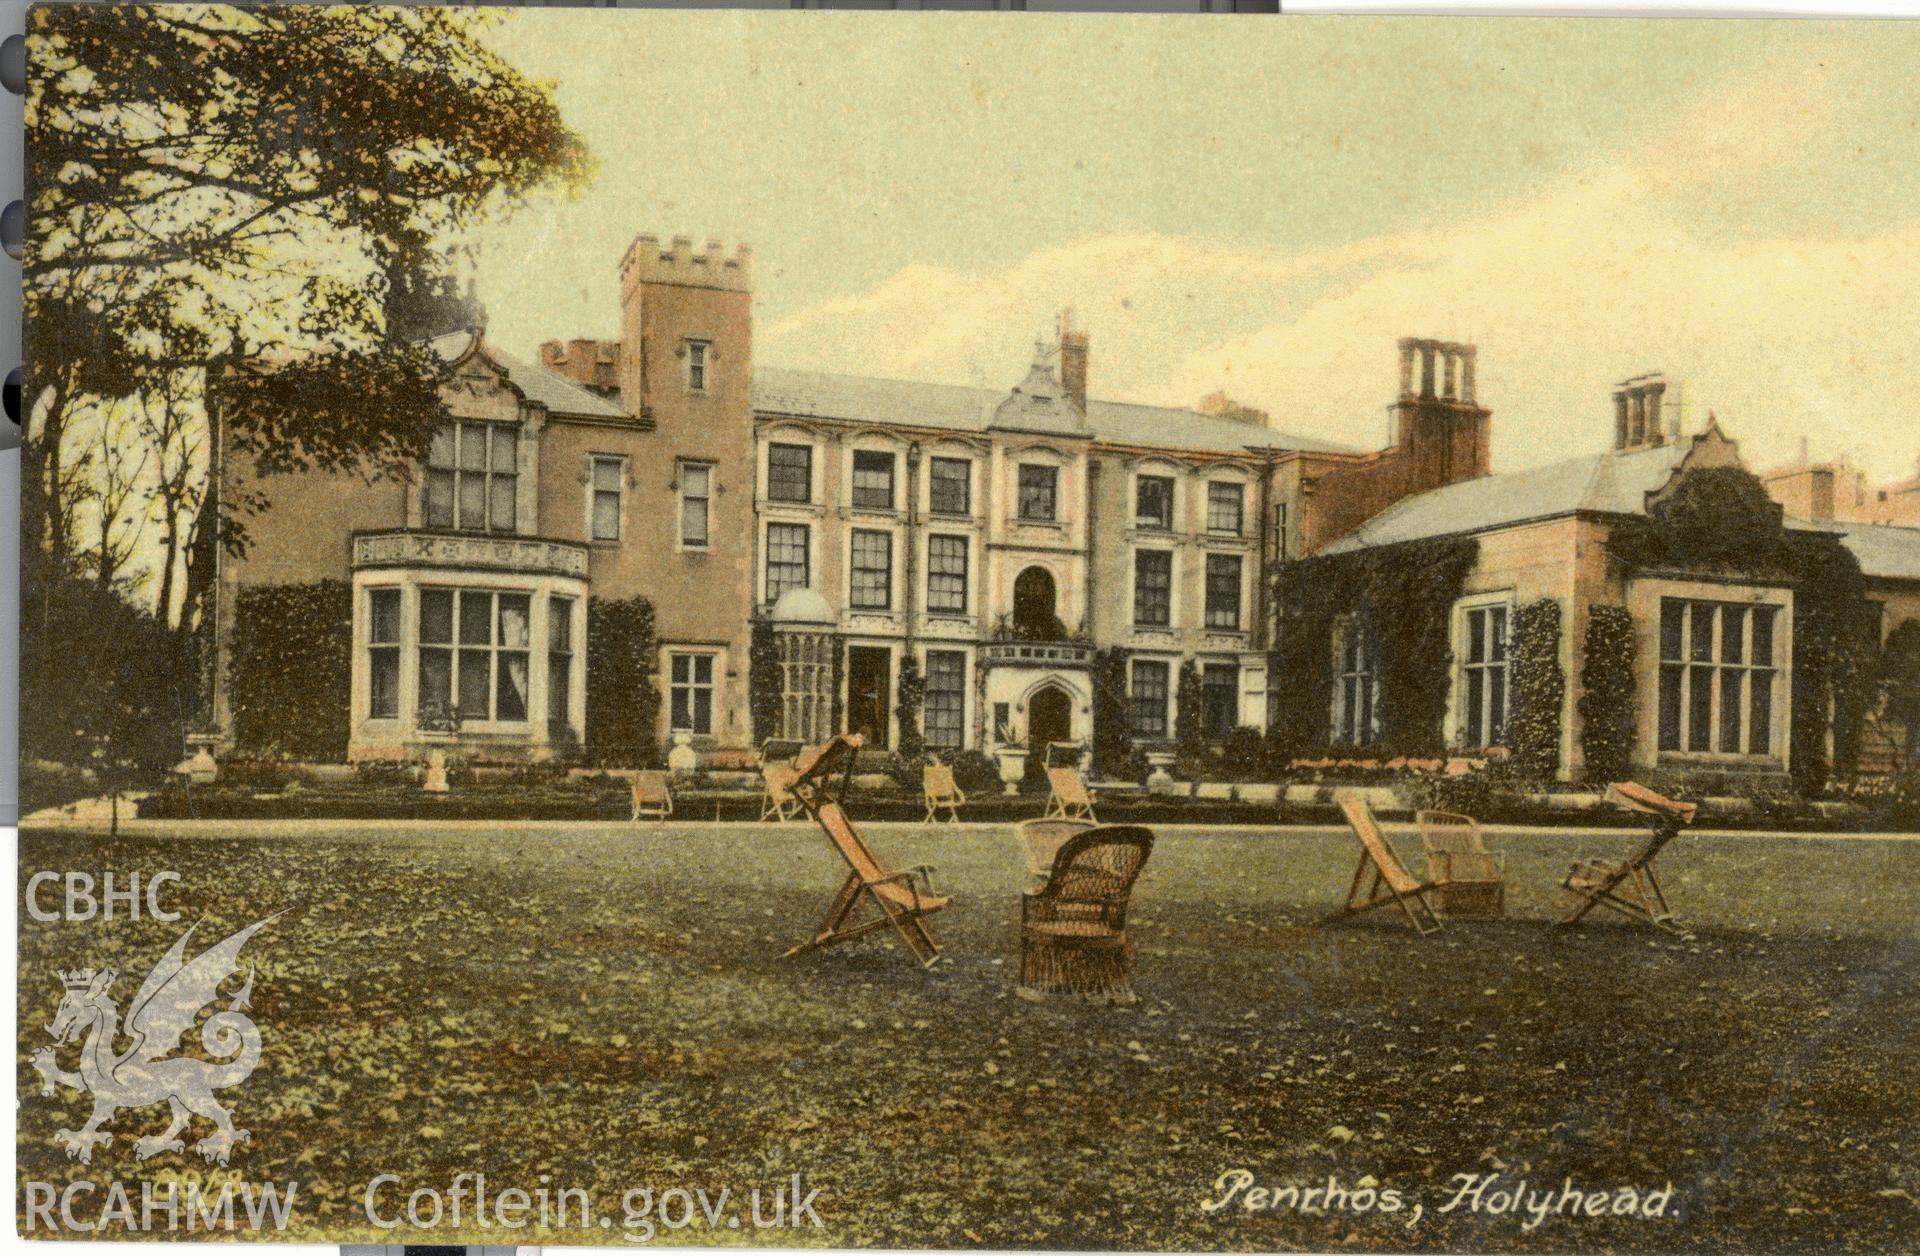 Digitised postcard image of Penrhos, Holyhead, The Knight Collection. Produced by Parks and Gardens Data Services, from an original item in the Peter Davis Collection at Parks and Gardens UK. We hold only web-resolution images of this collection, suitable for viewing on screen and for research purposes only. We do not hold the original images, or publication quality scans.